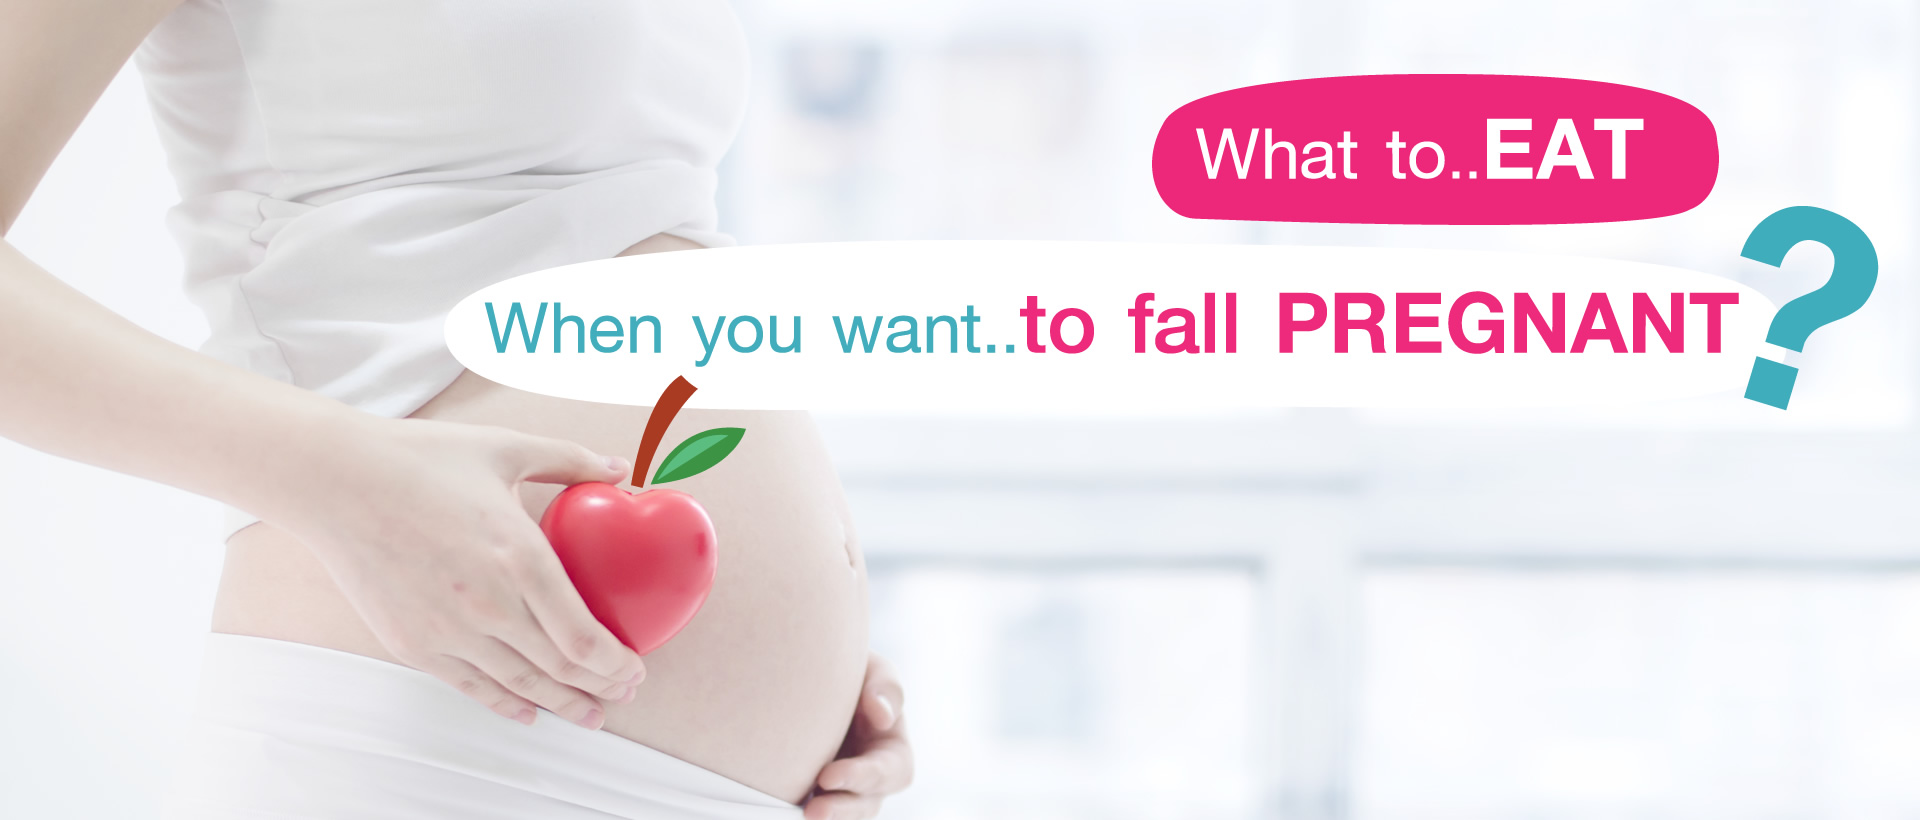 What to eat when you want to fall pregnant